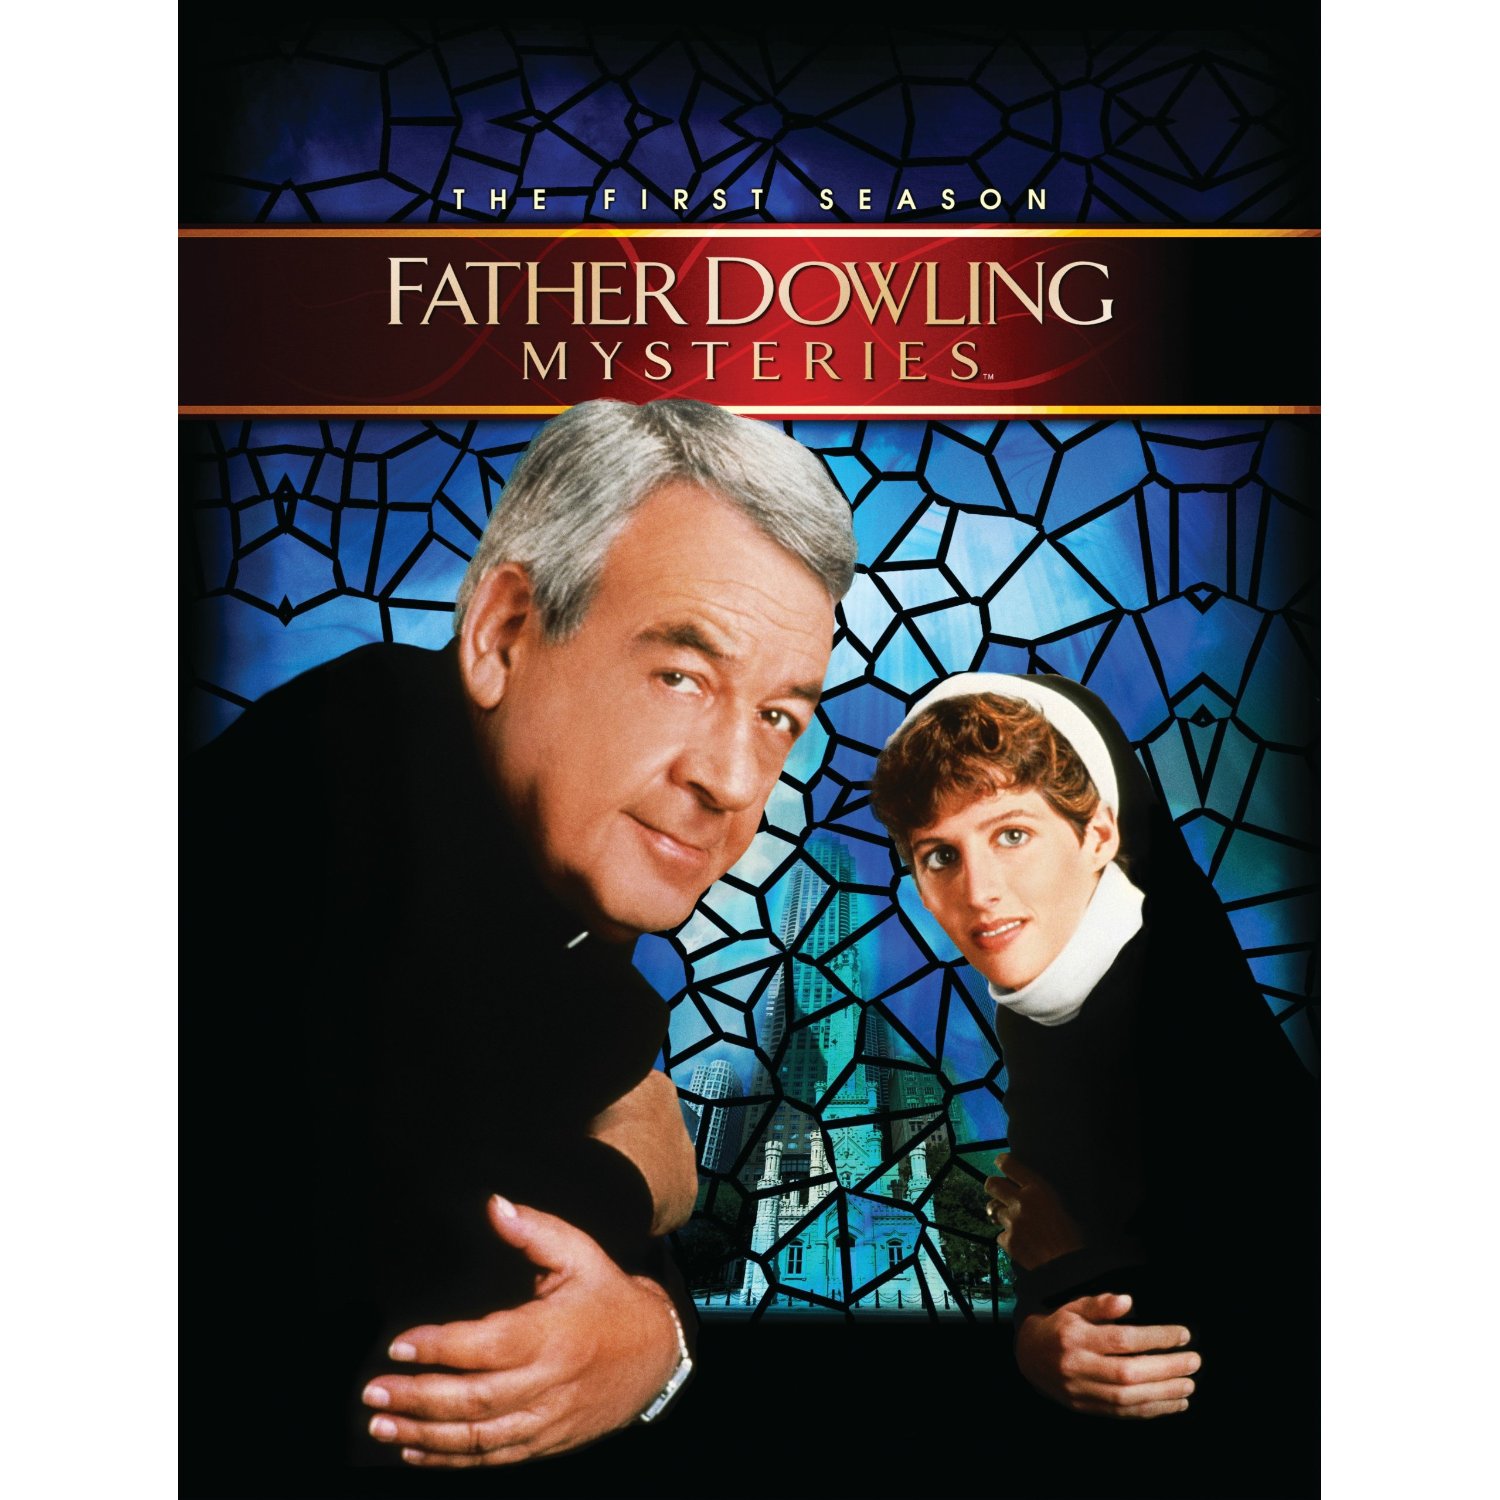 http://upcomingdiscs.com/ecs_covers/father-dowling-mysteries-the-first-season-large.jpg